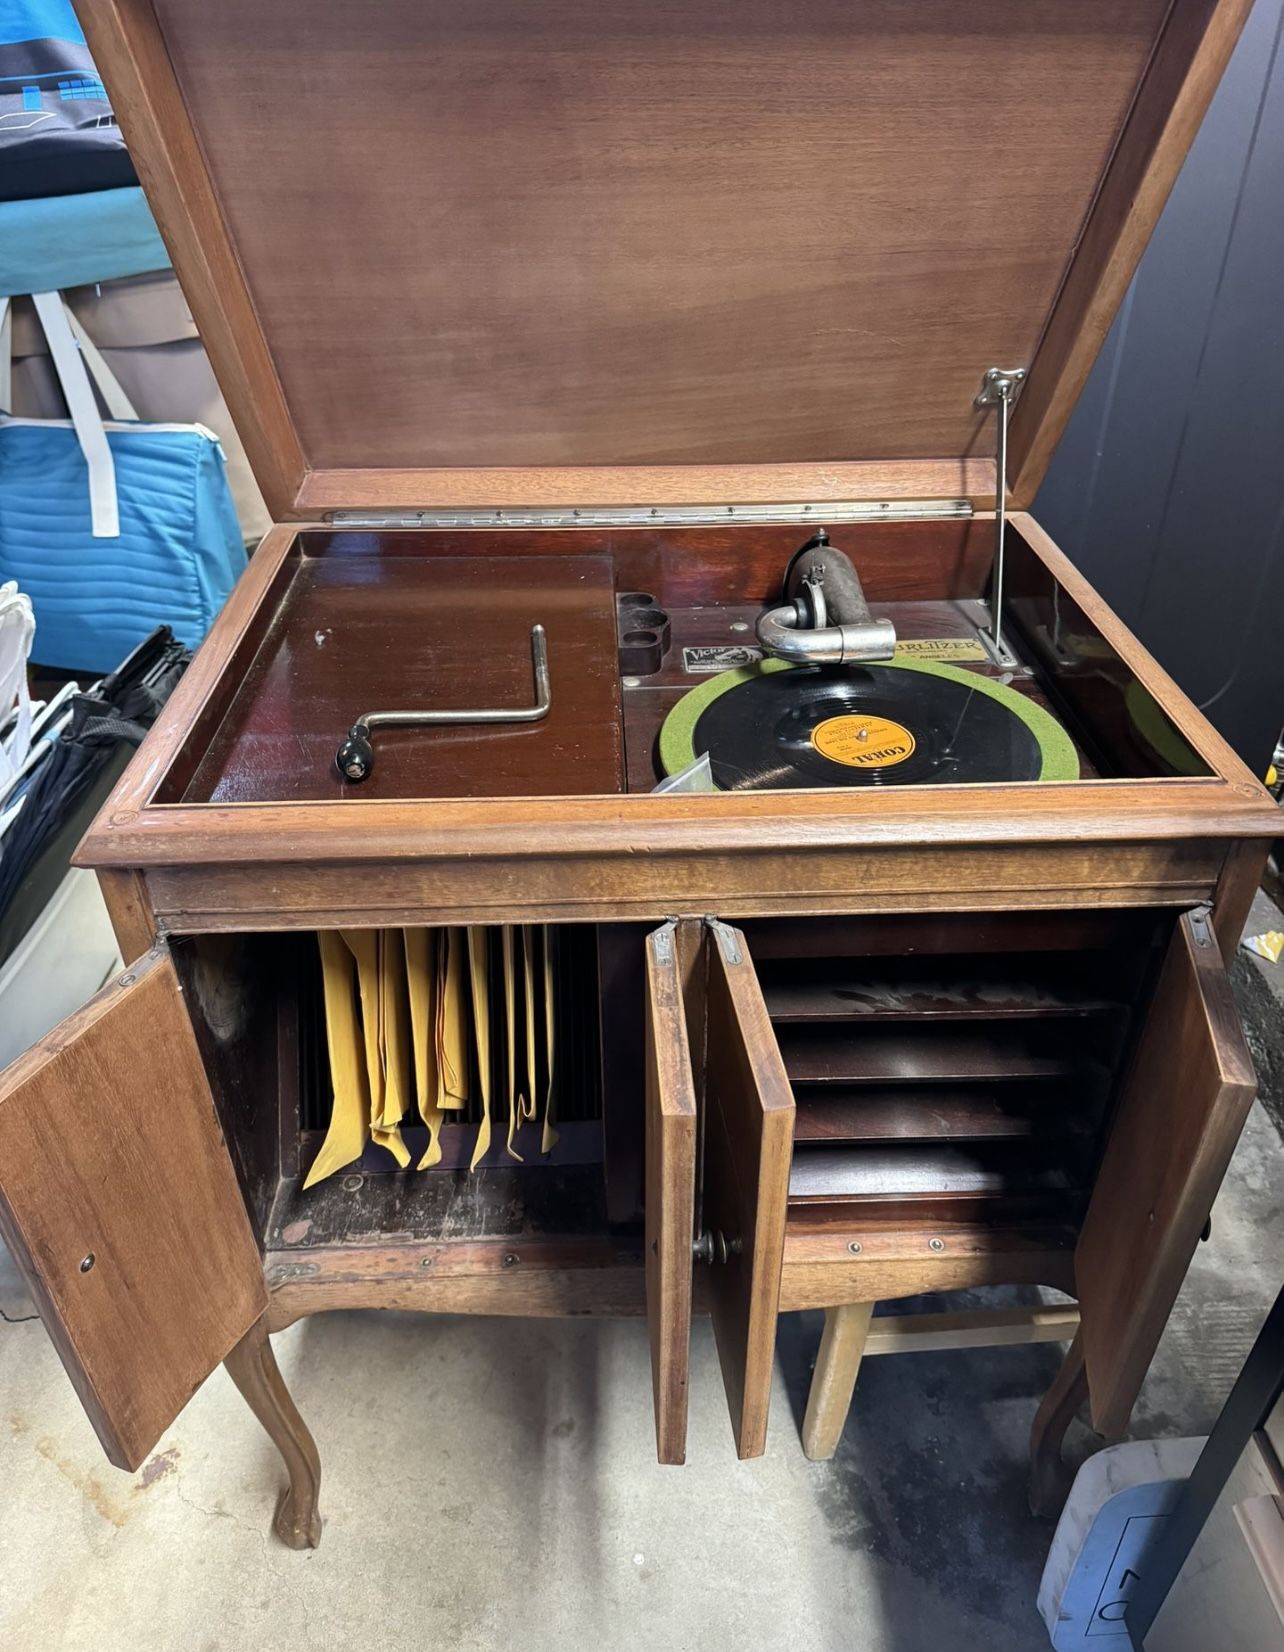 Record Player